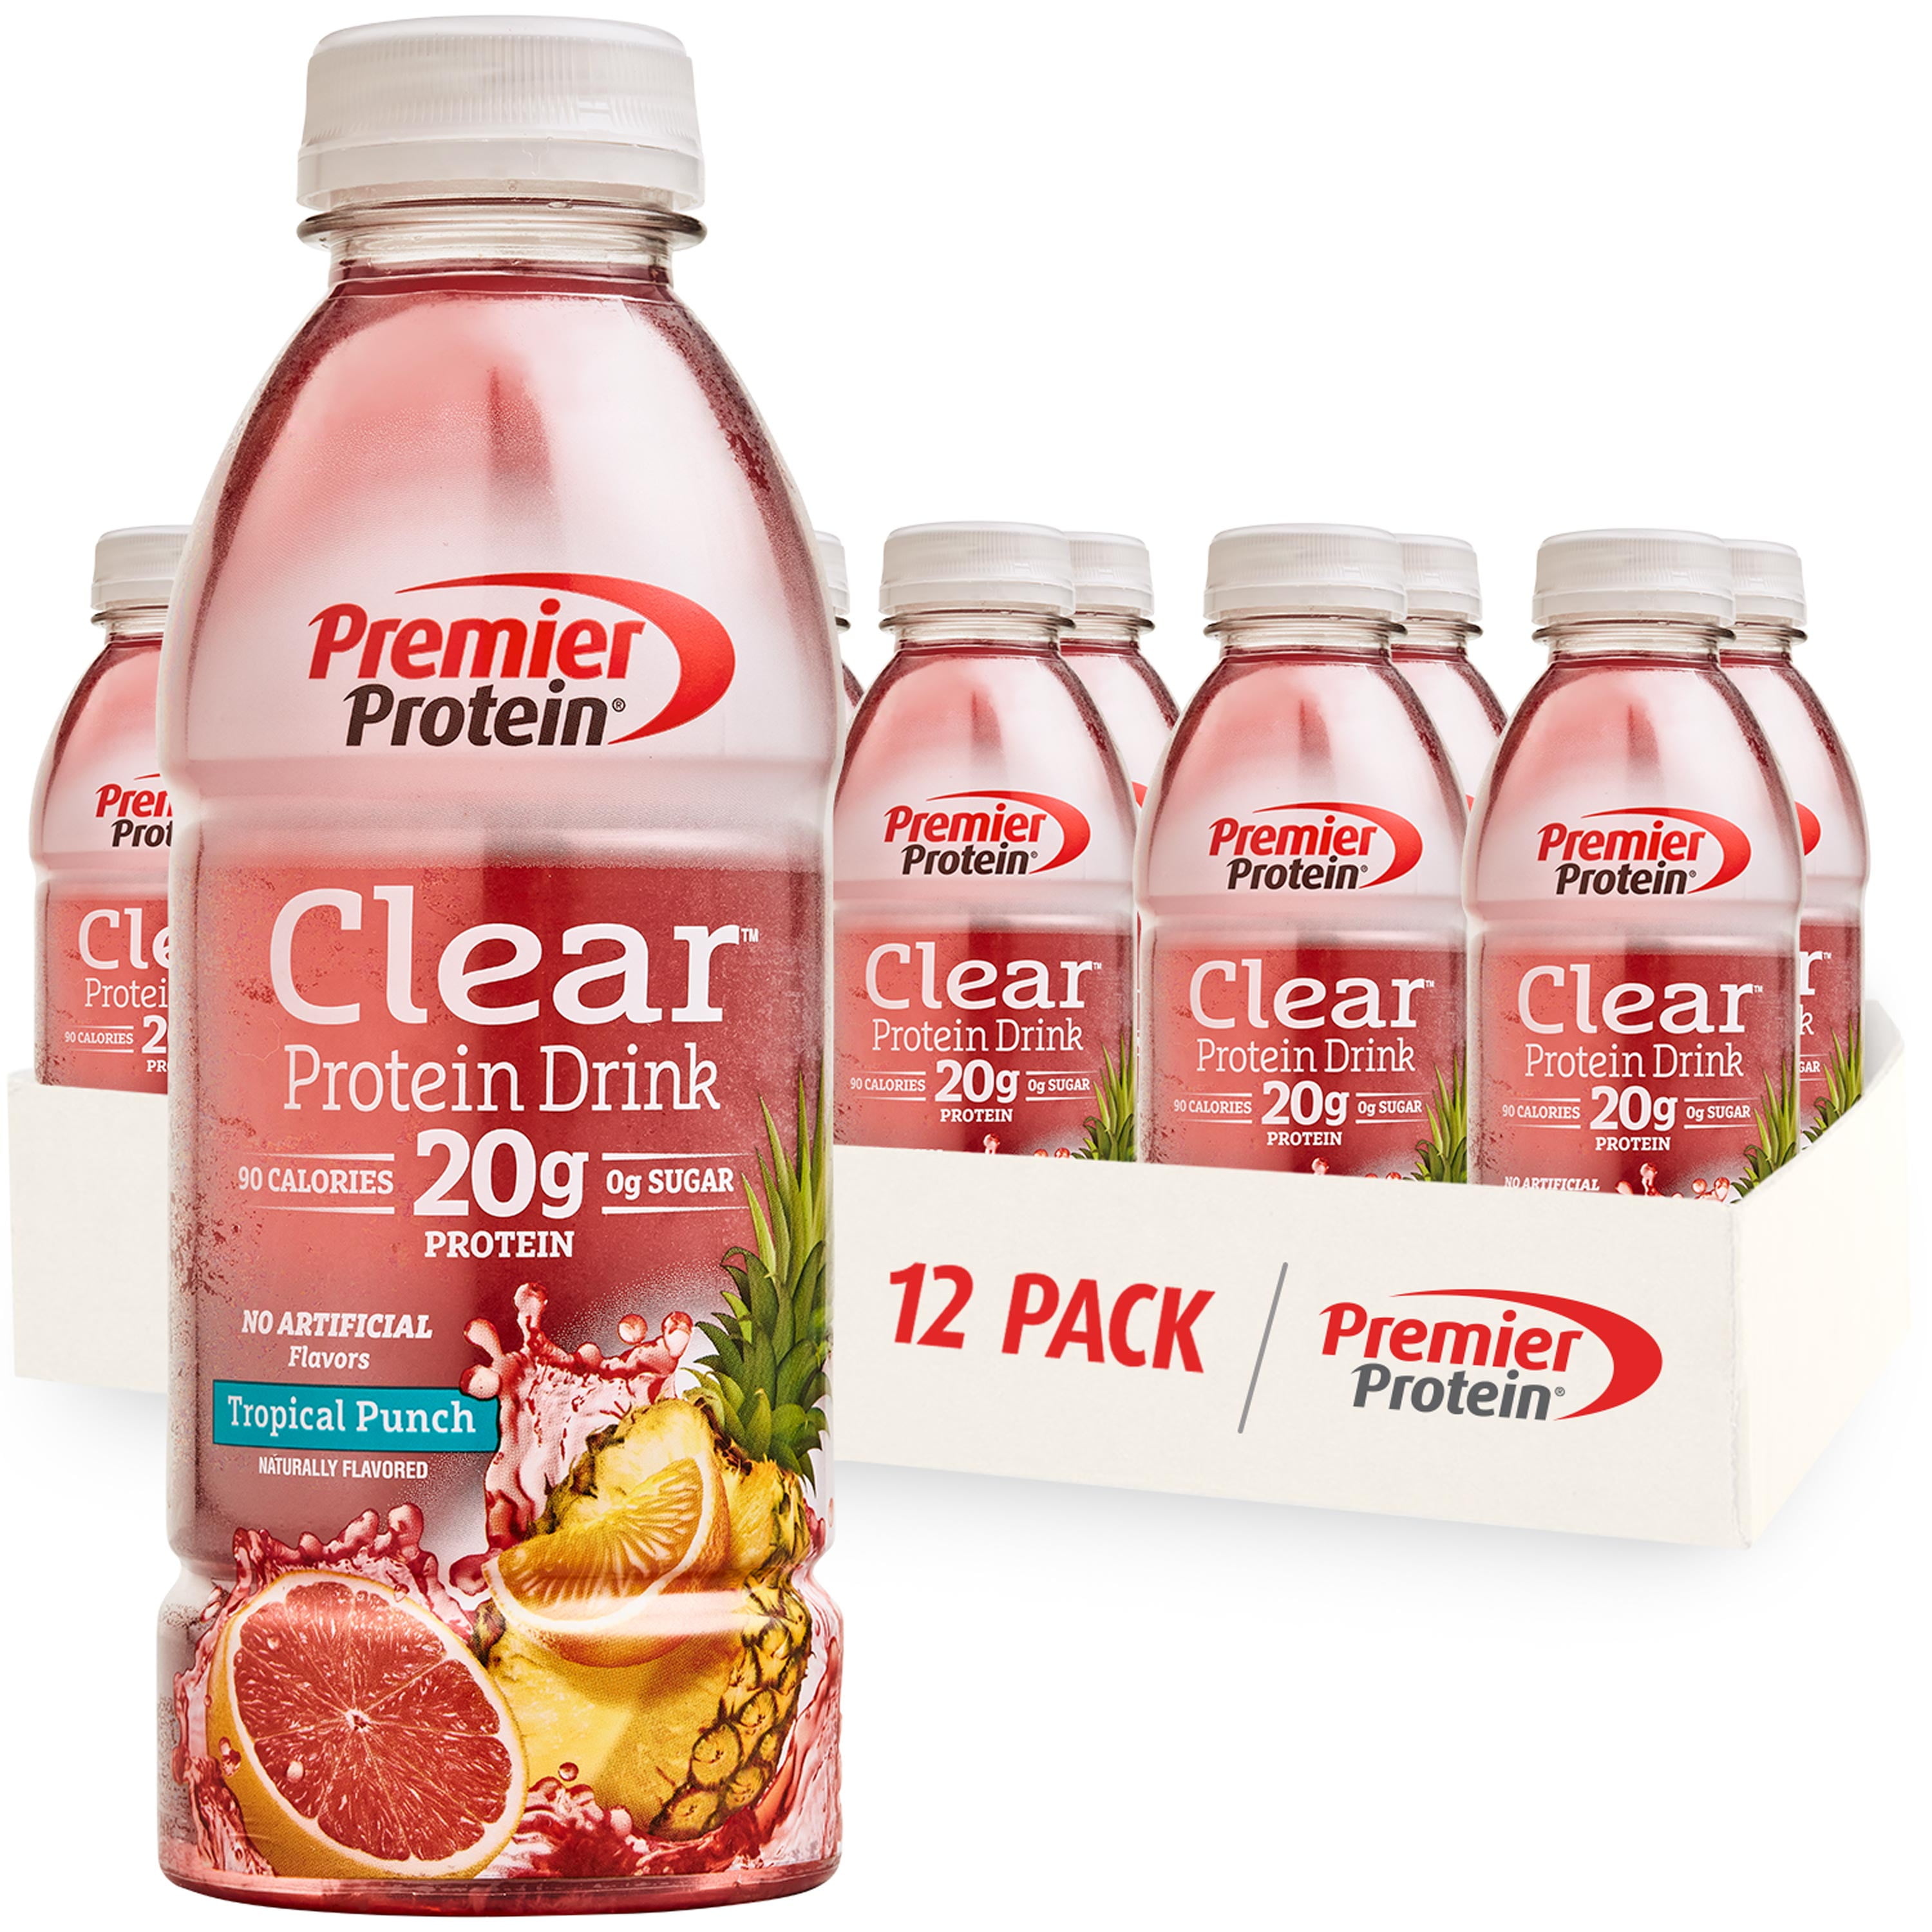 Premier Protein Clear Protein Drink, Tropical Punch, 20g Protein, 16.9